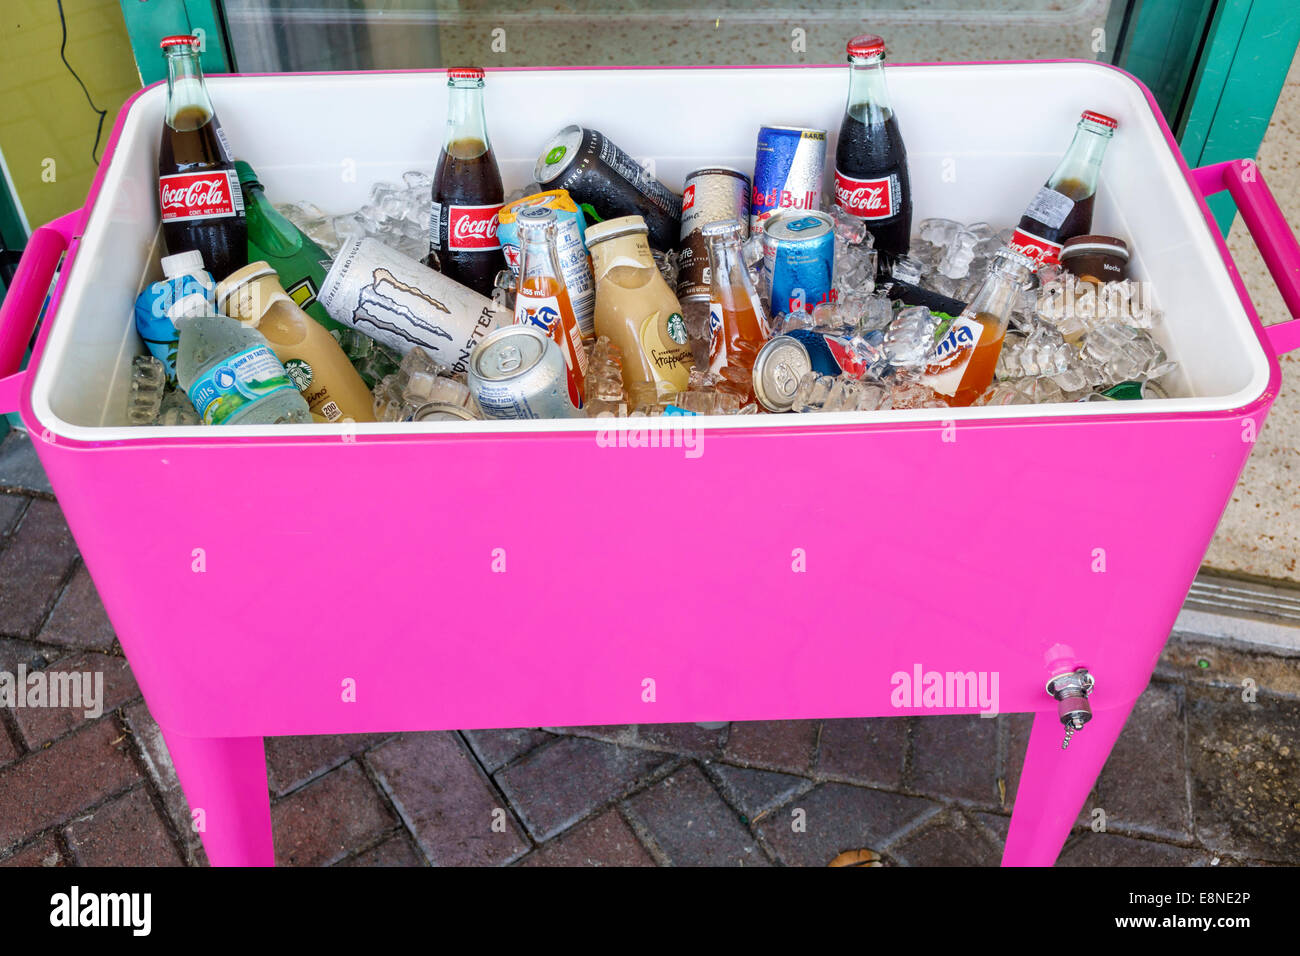 Delray Beach Florida,cold drink drinks,sale,chest,ice,bottles,cans,Coca-Cola,Red Bull,FL140523003 Stock Photo